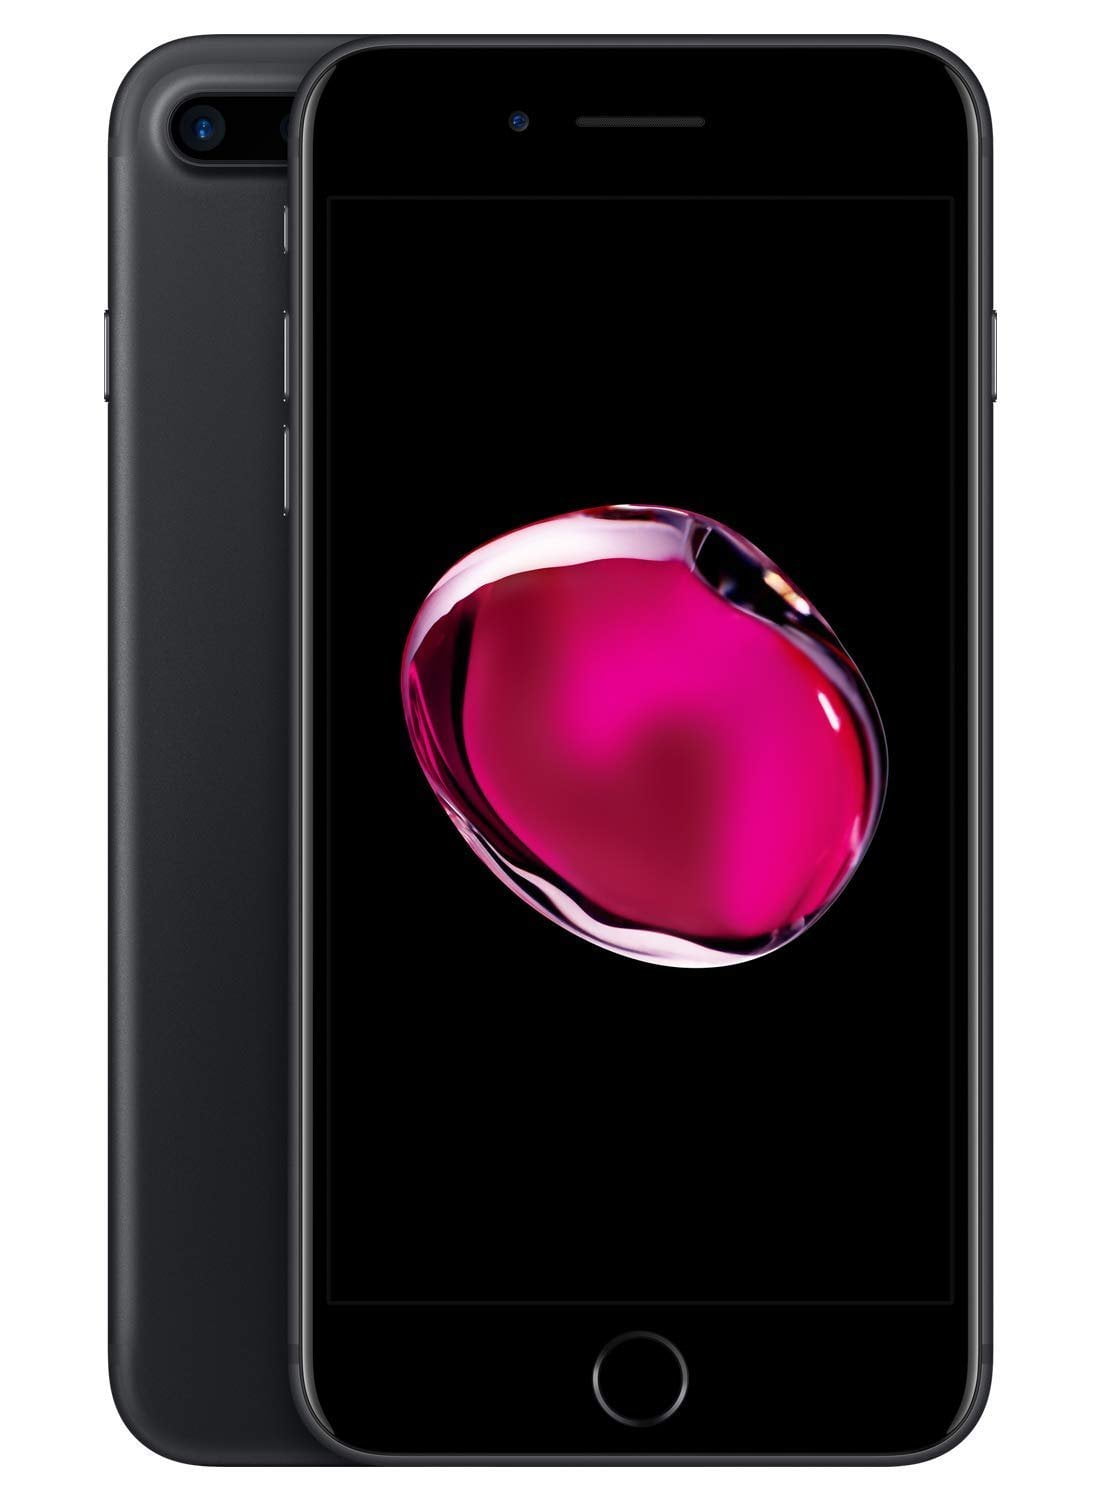 Refurbished Apple iPhone 7 Plus 128GB GSM Unlocked AT&T T-Mobile